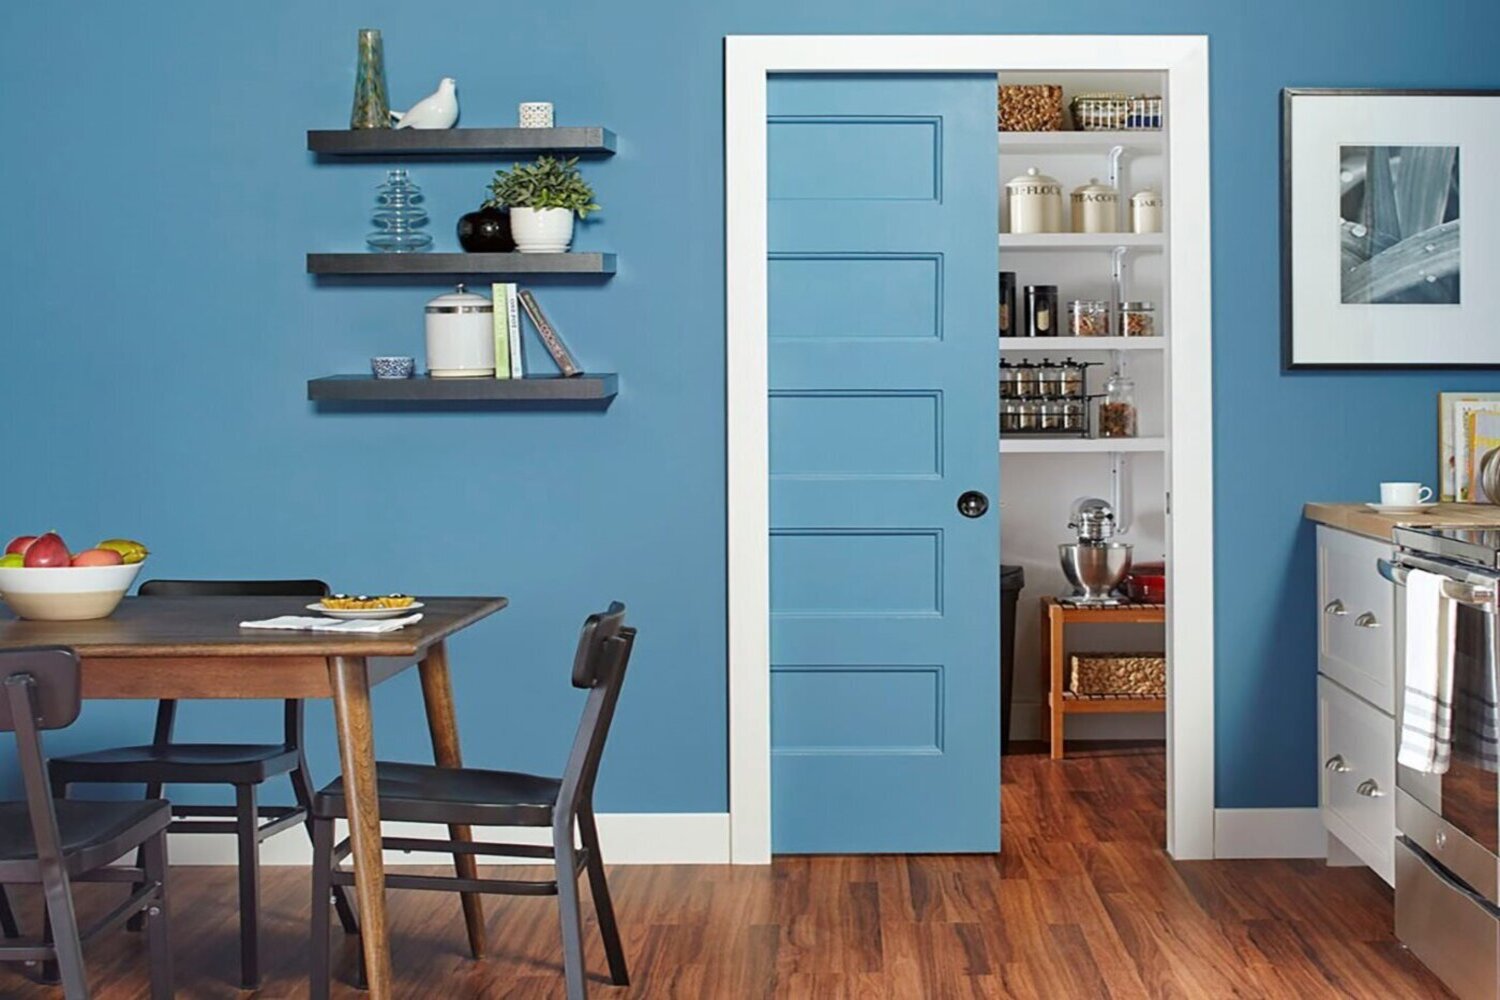 How To Install A Pocket Door That Stylishly Saves Space